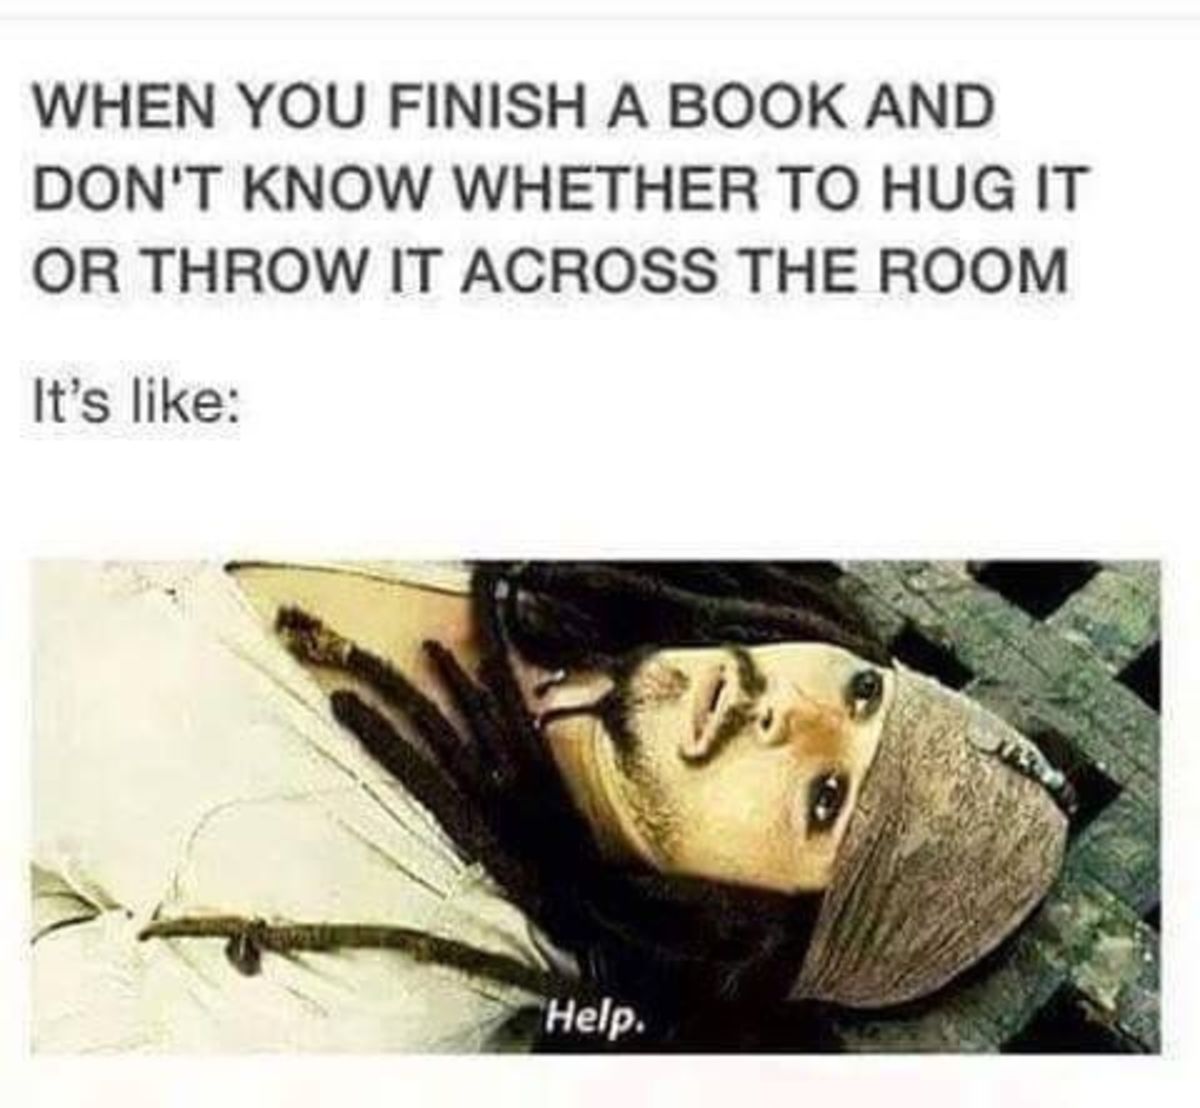 That feeling when you finish a good book